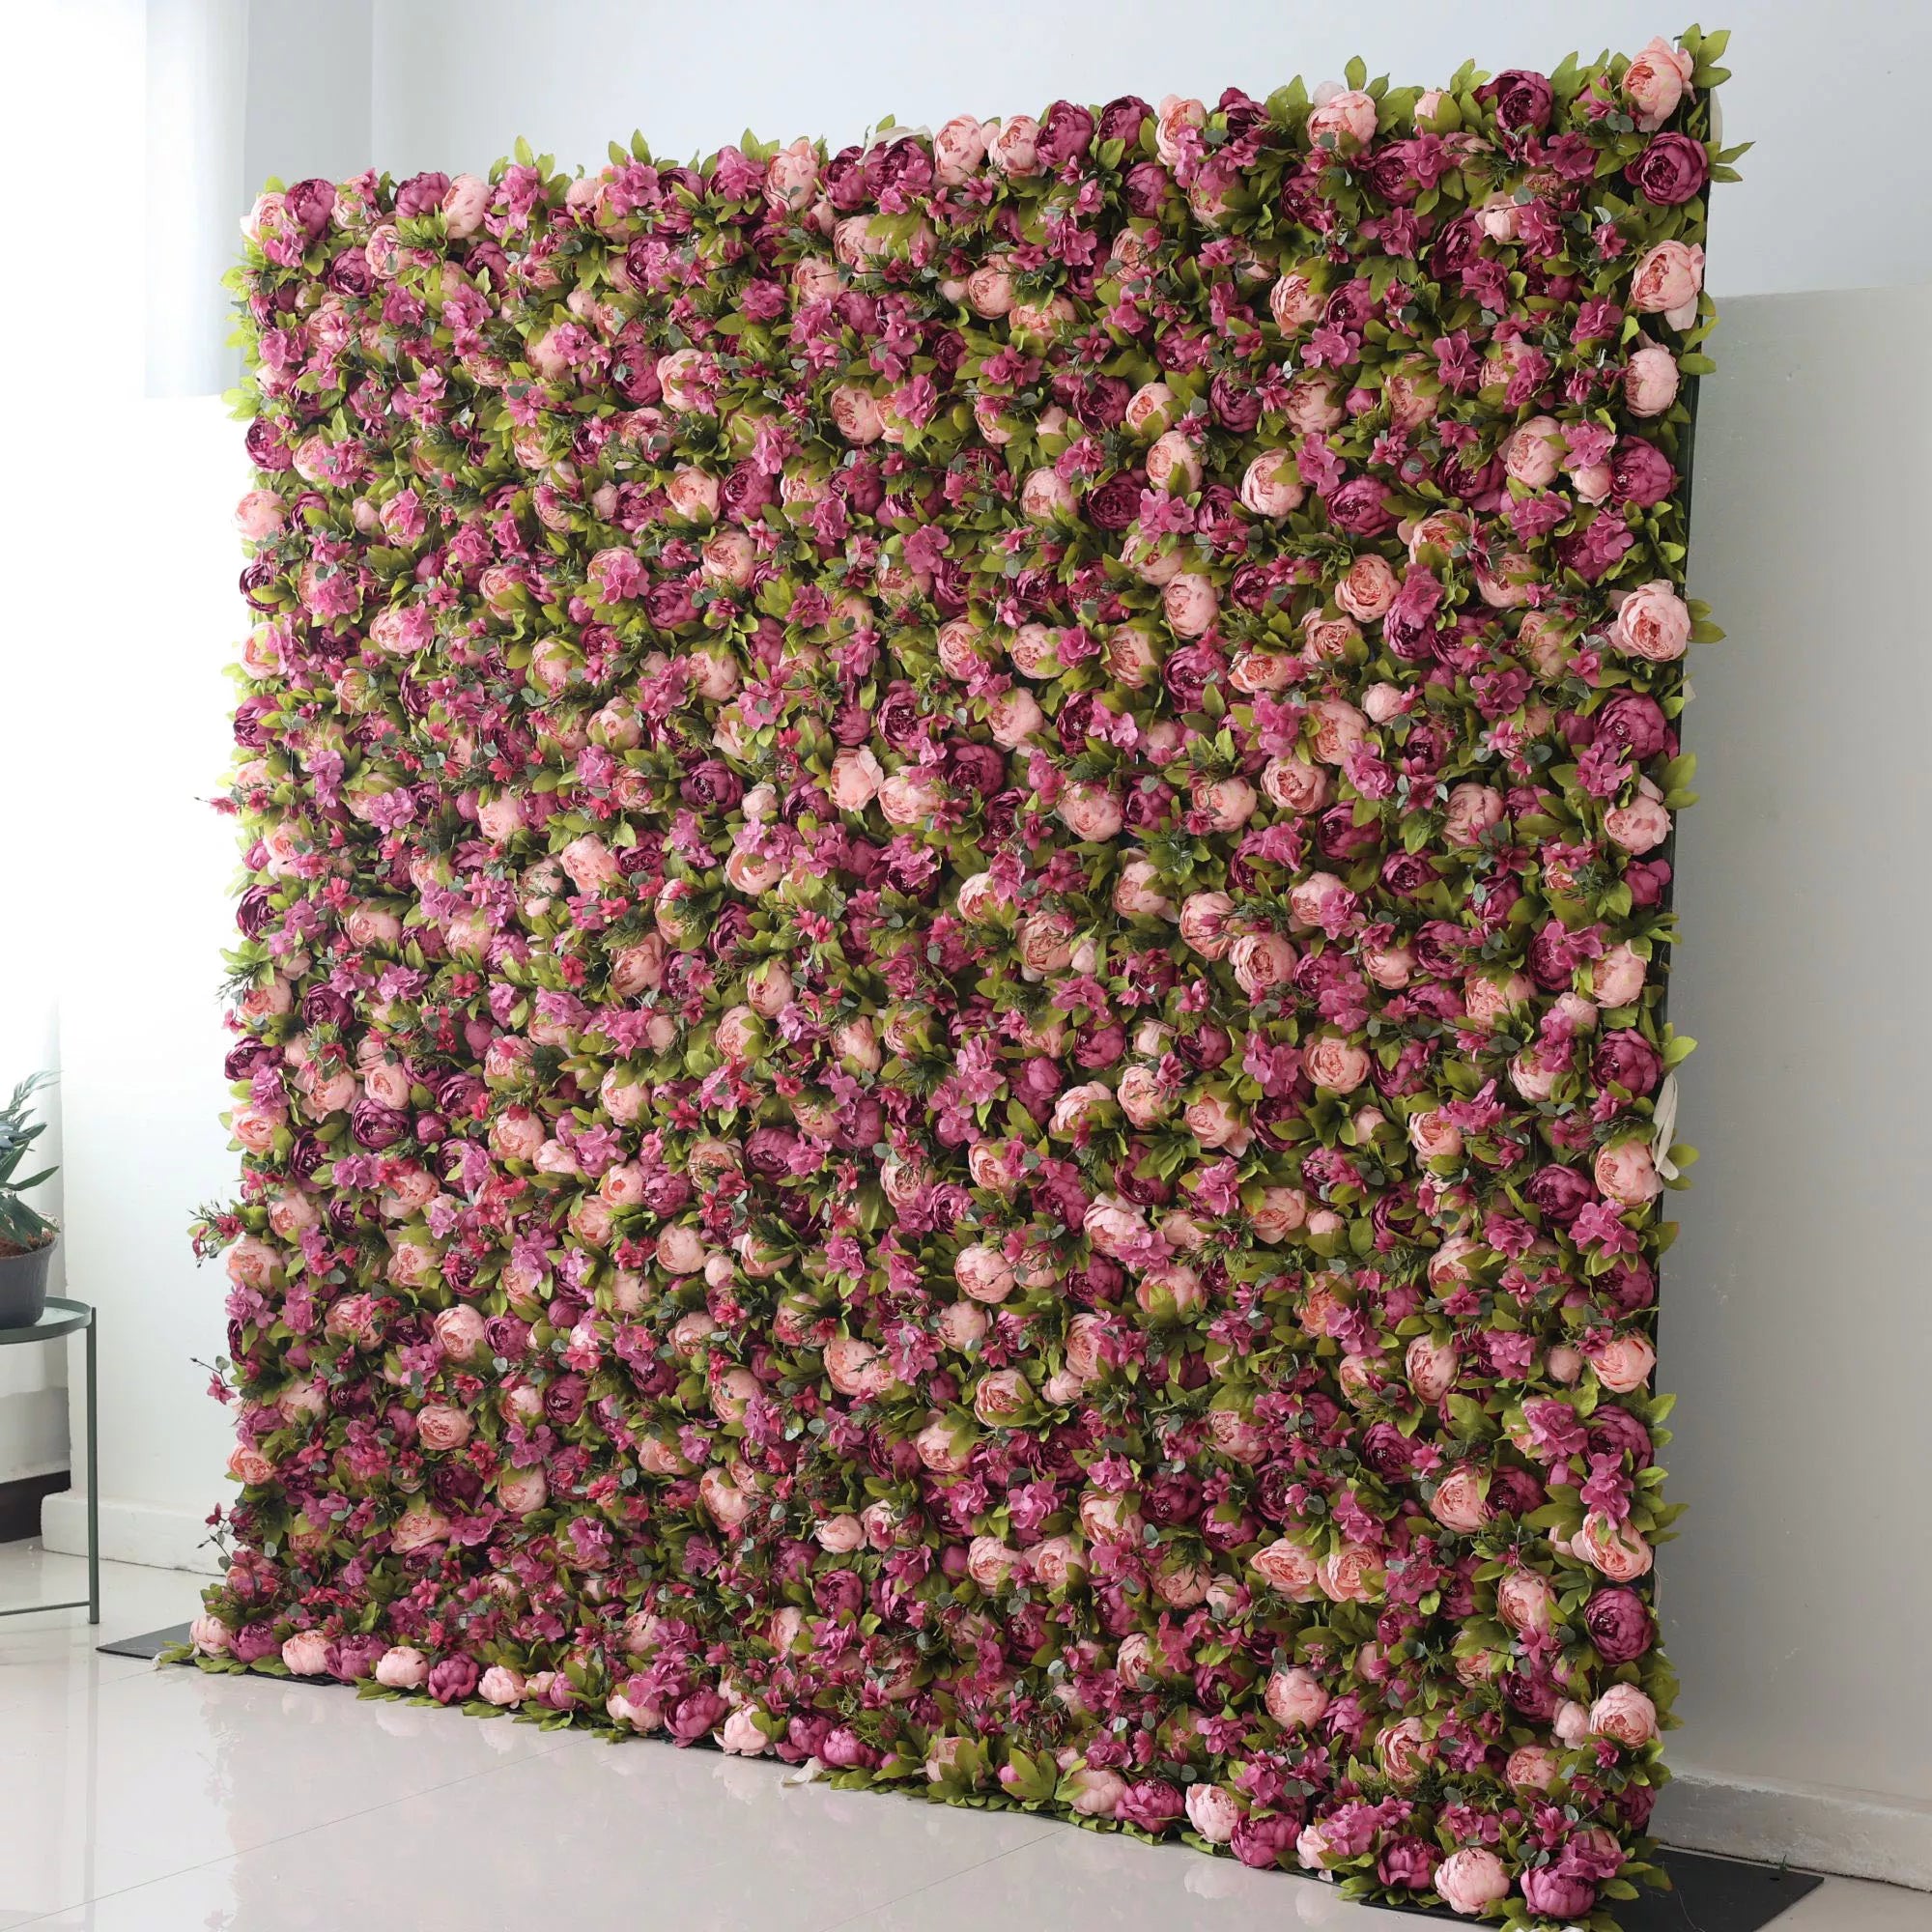 Valar Flowers Roll Up Fabric Artificial Turkish Rose and Light Orchid Color With Pale Olive Green Leaves Flower Wall Wedding Backdrop, Floral Party Decor, Event Photography-VF-001